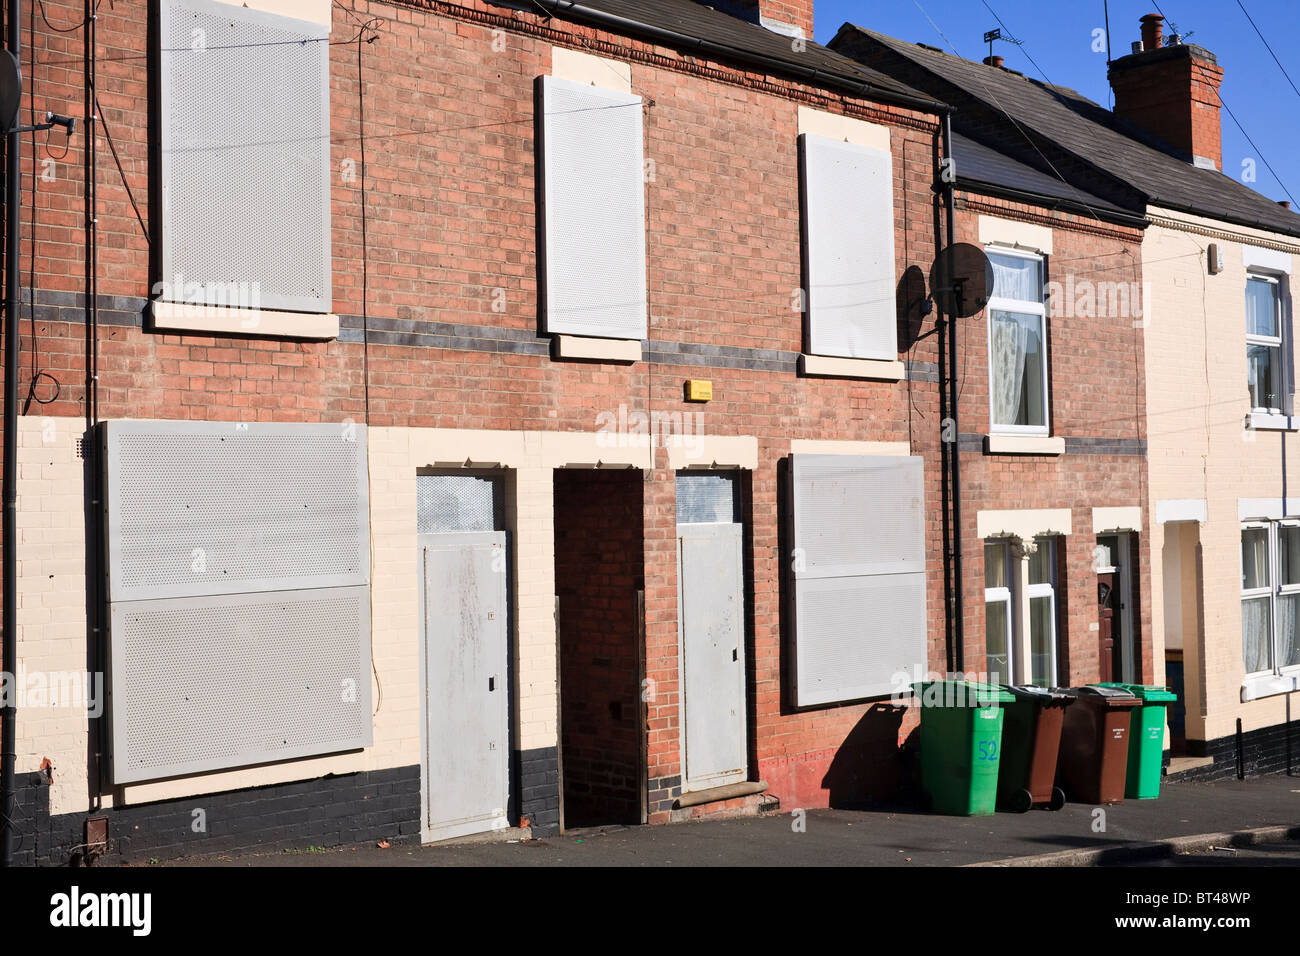 2 TERRACE HOUSES IN A ROW WITH BOARDED UP WINDOWS IN SNEINTON, NOTTINGHAM, UK. SNEINTON IS A FAIRLY DEPRIVED AREA. Stock Photo